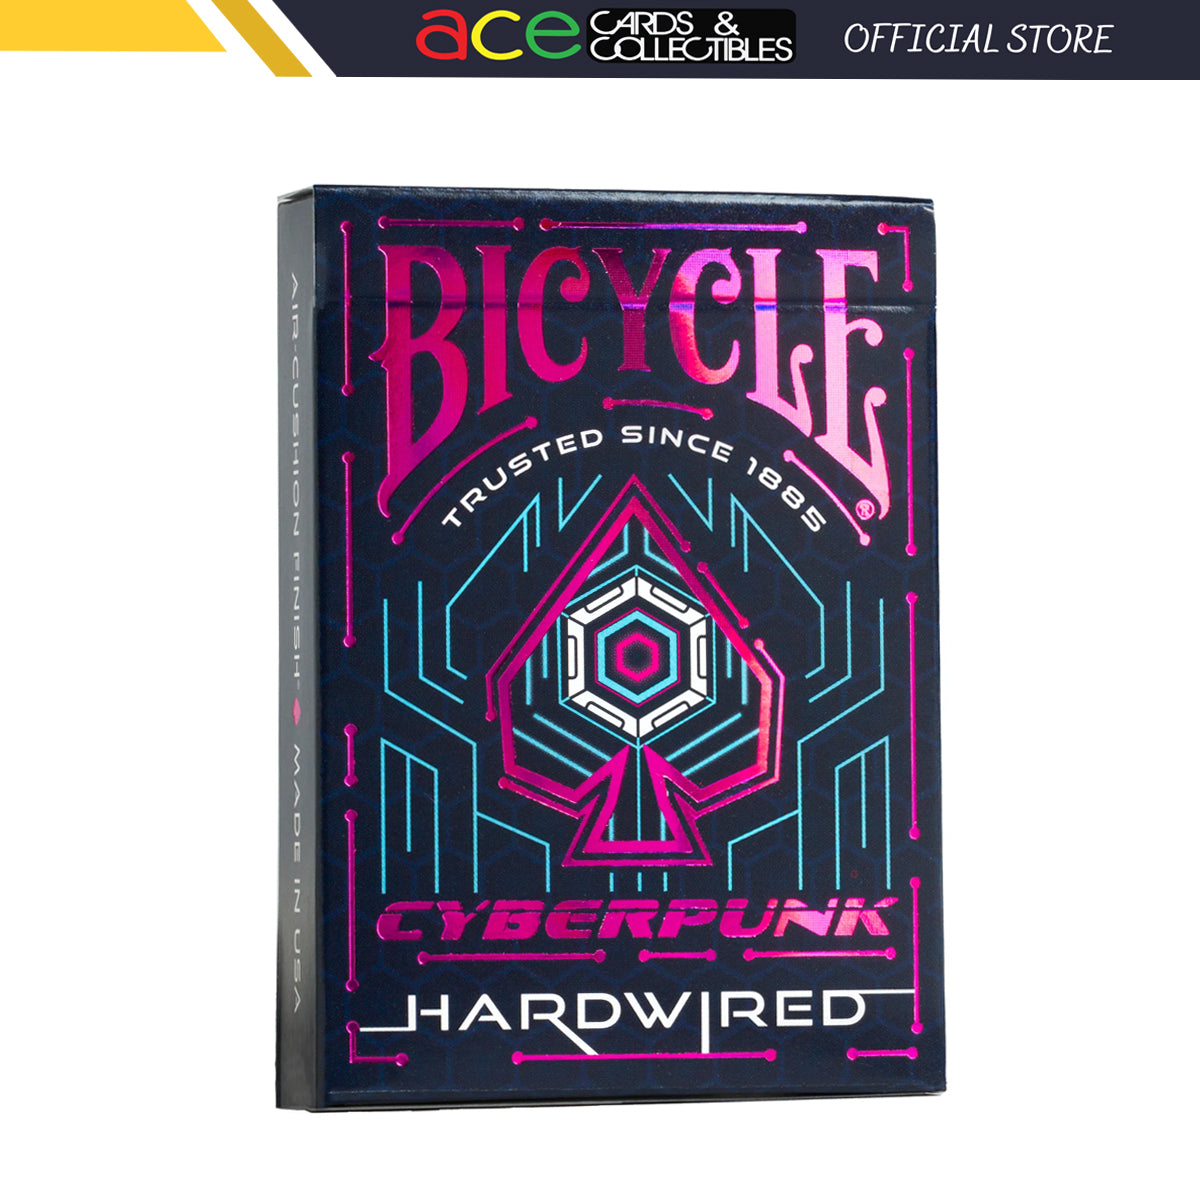 Bicycle Cyberpunk Hardwired Playing Cards-United States Playing Cards Company-Ace Cards & Collectibles